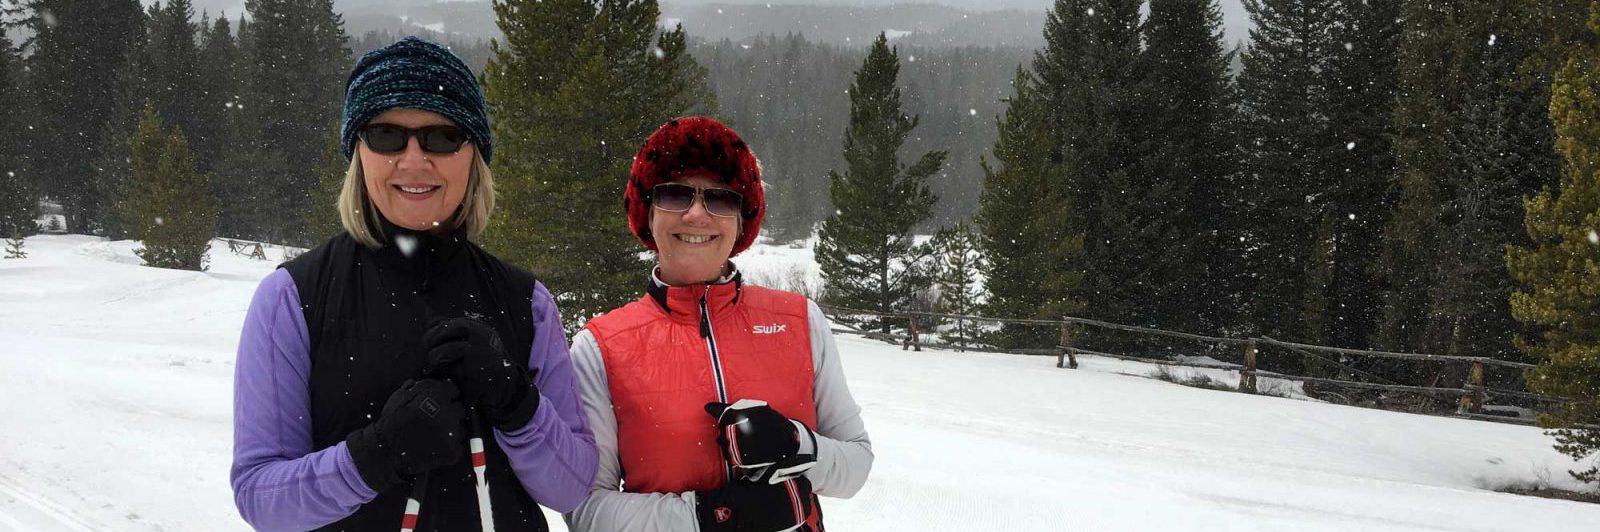 Two girls on a fitness vacation skiing